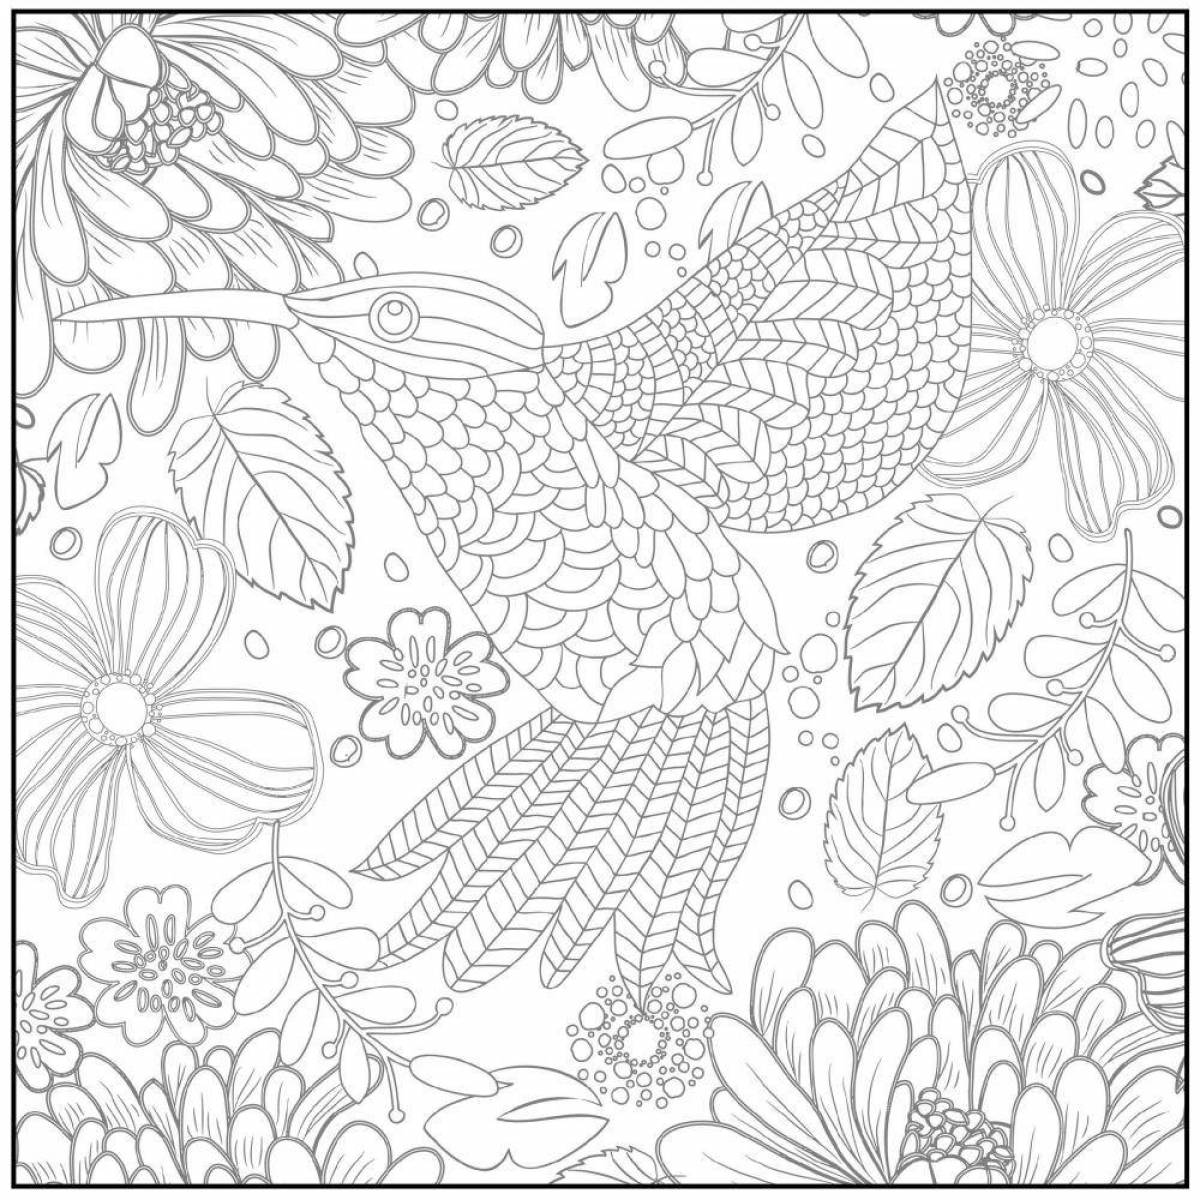 Calm relaxation coloring book for kids